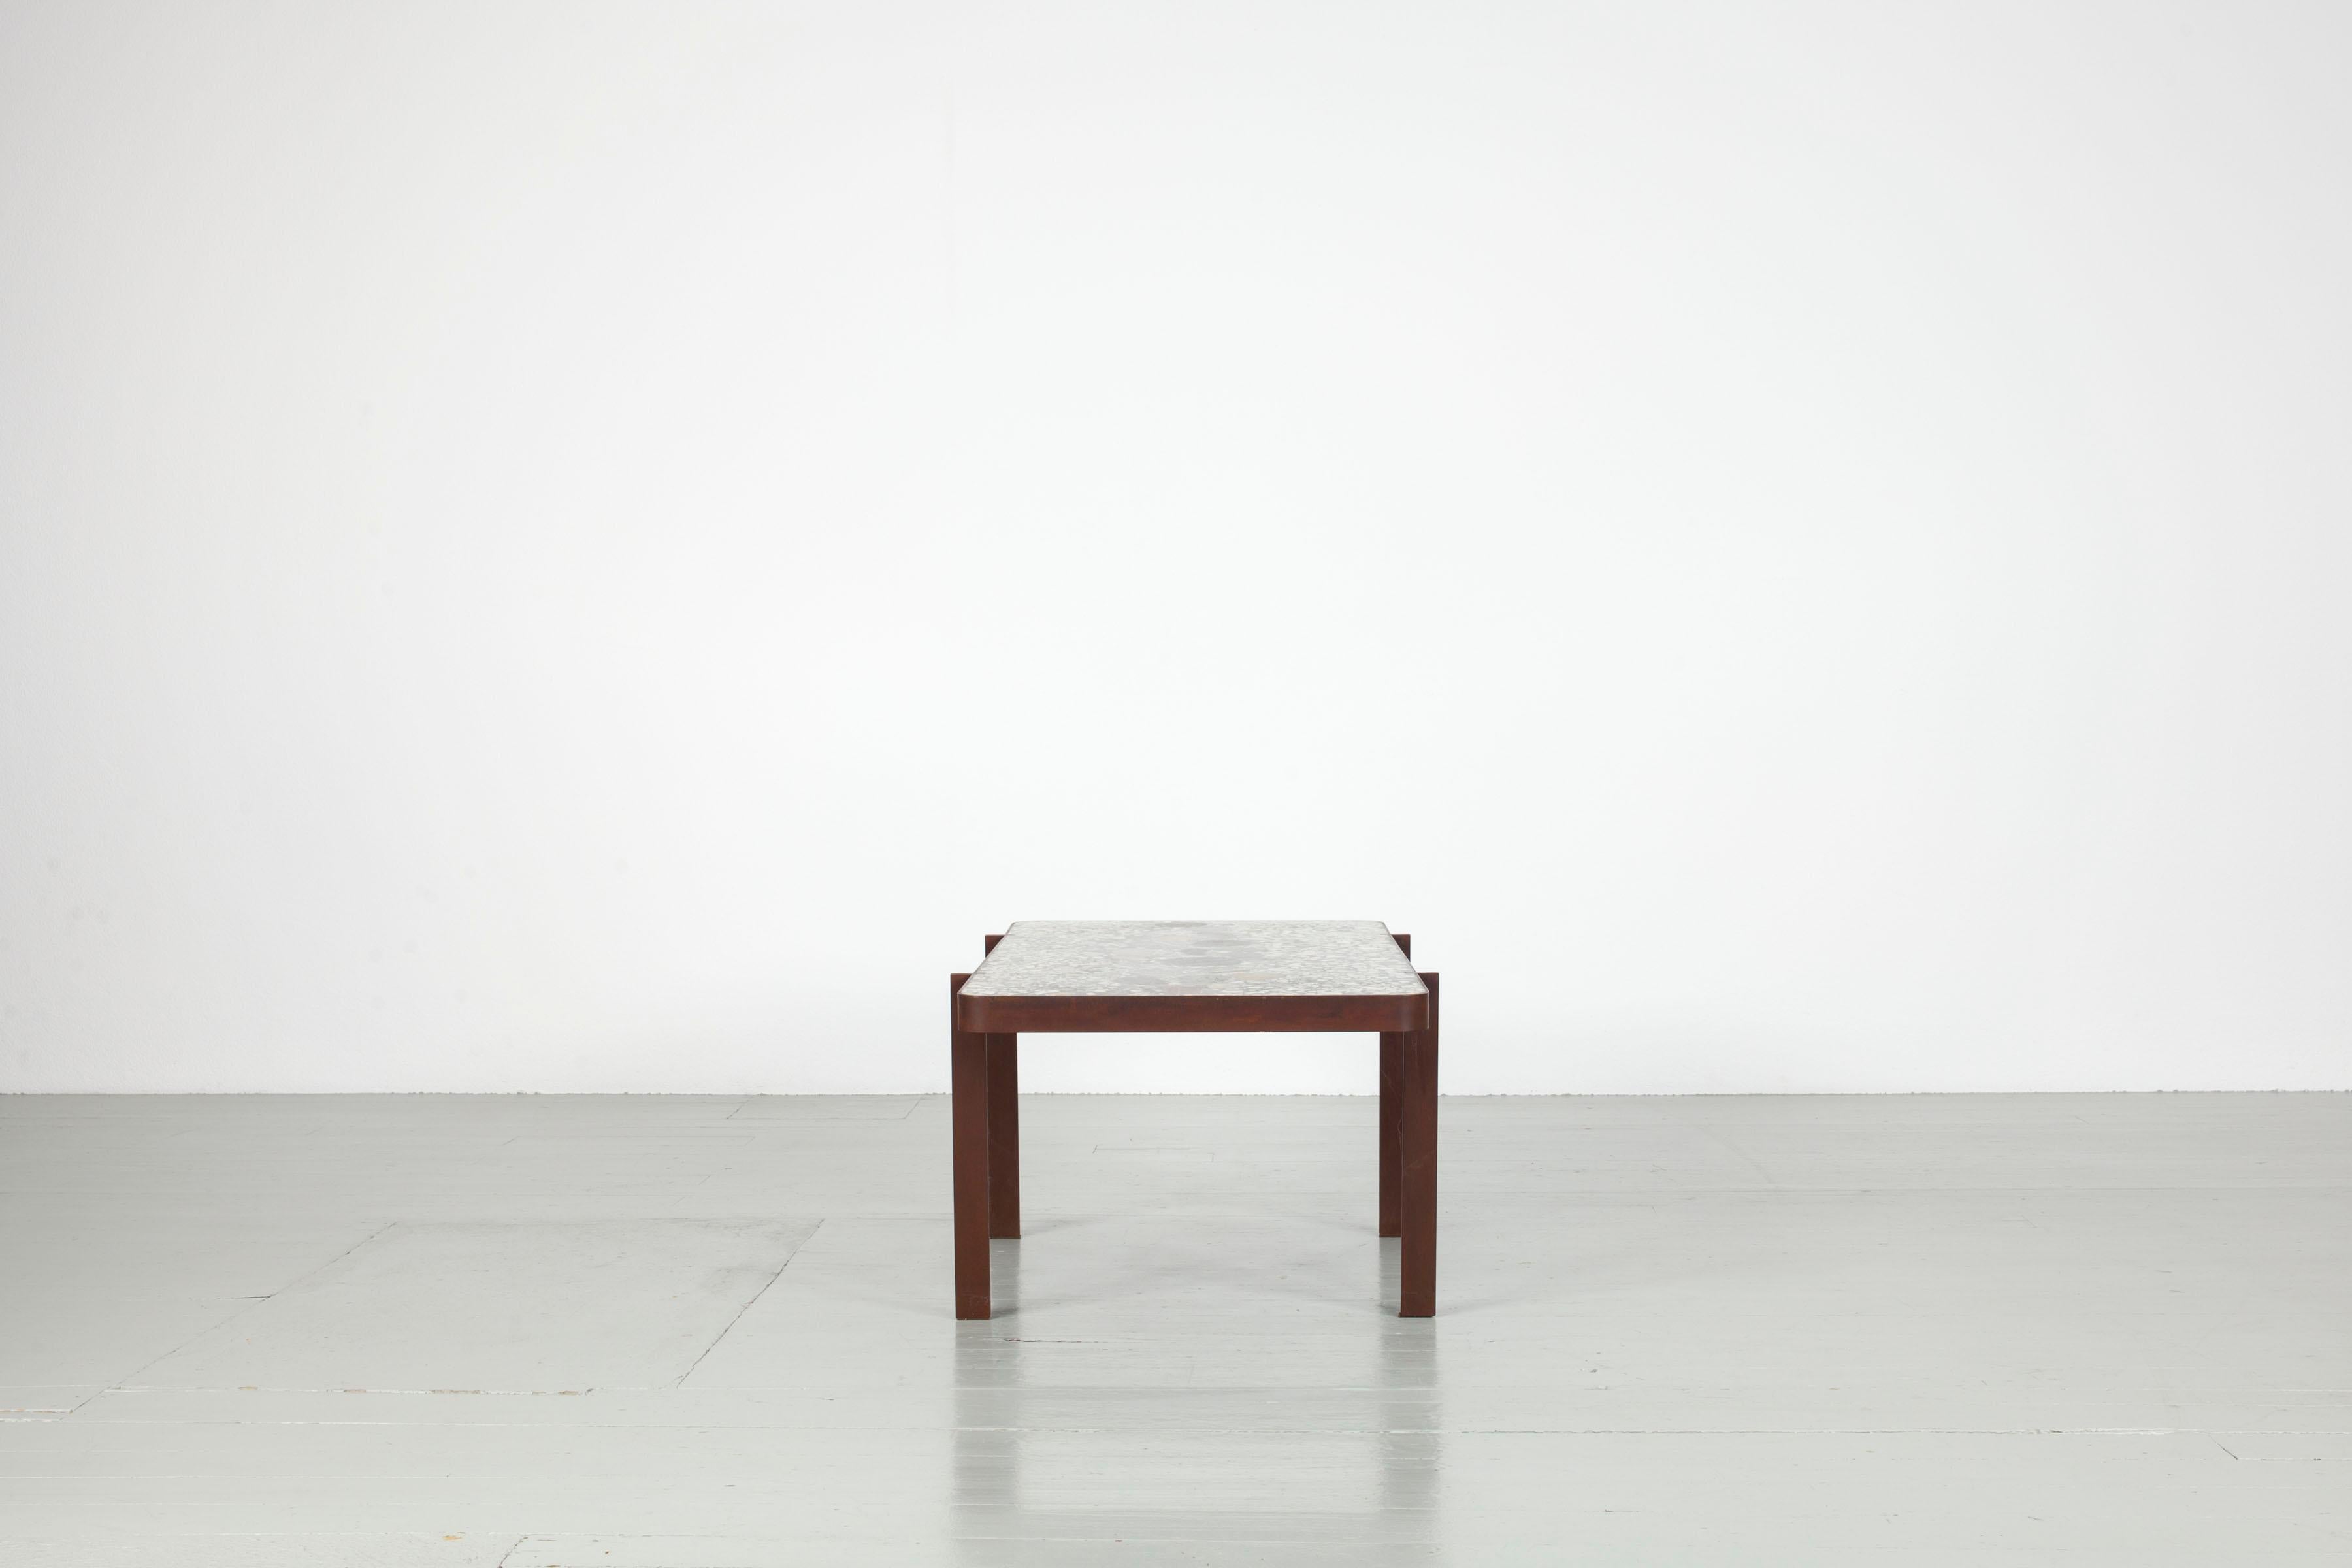 Felix Muhrhofer Contemporary Terrazzo Table with Corroded Steel Construction 2